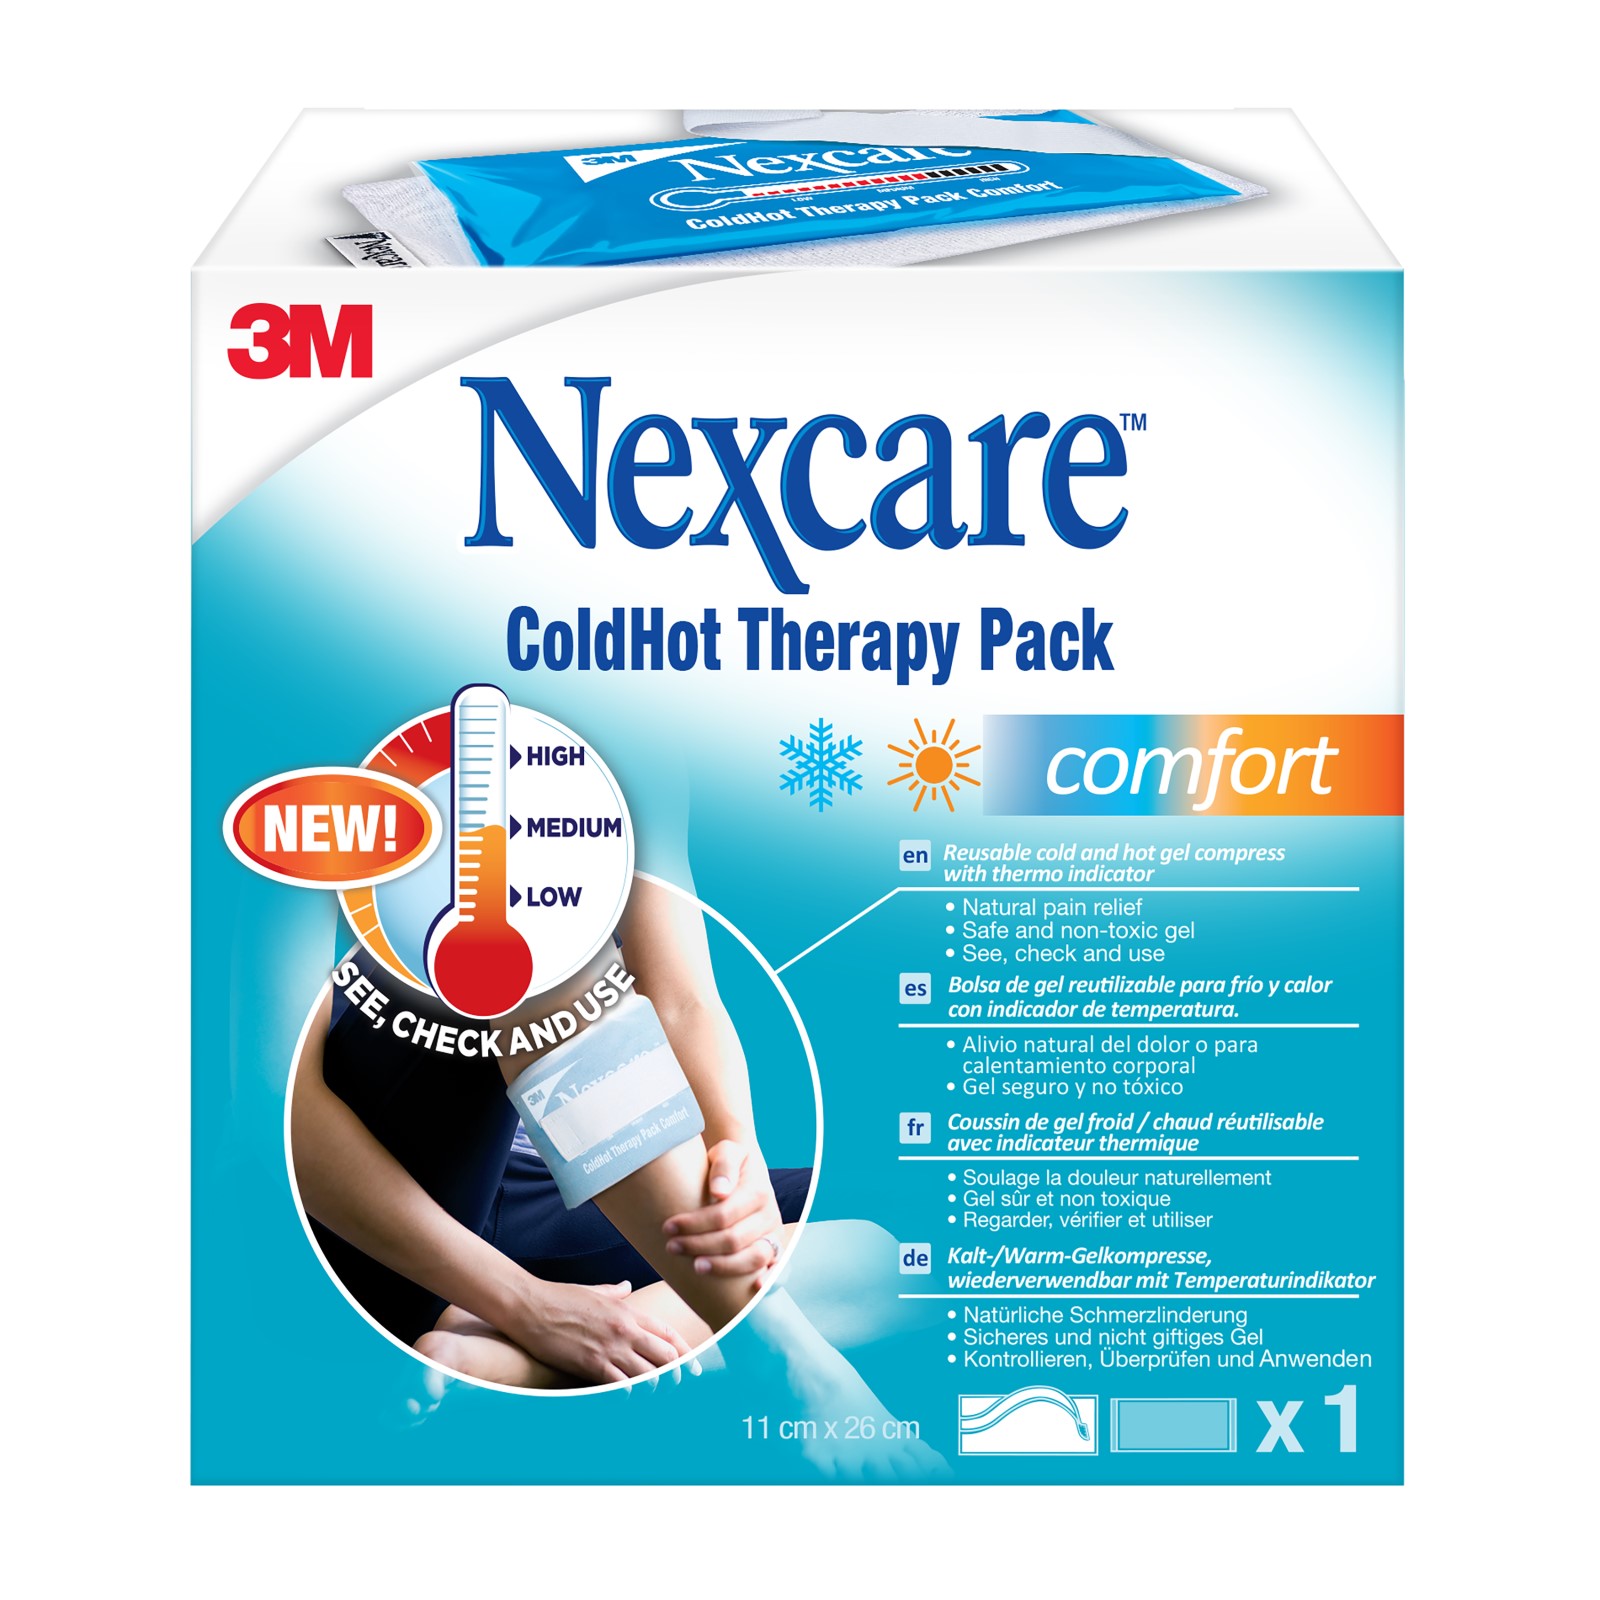 Nexcare™ ColdHot Therapy Pack Comfort Thermoindicator, 26cm x 11 cm